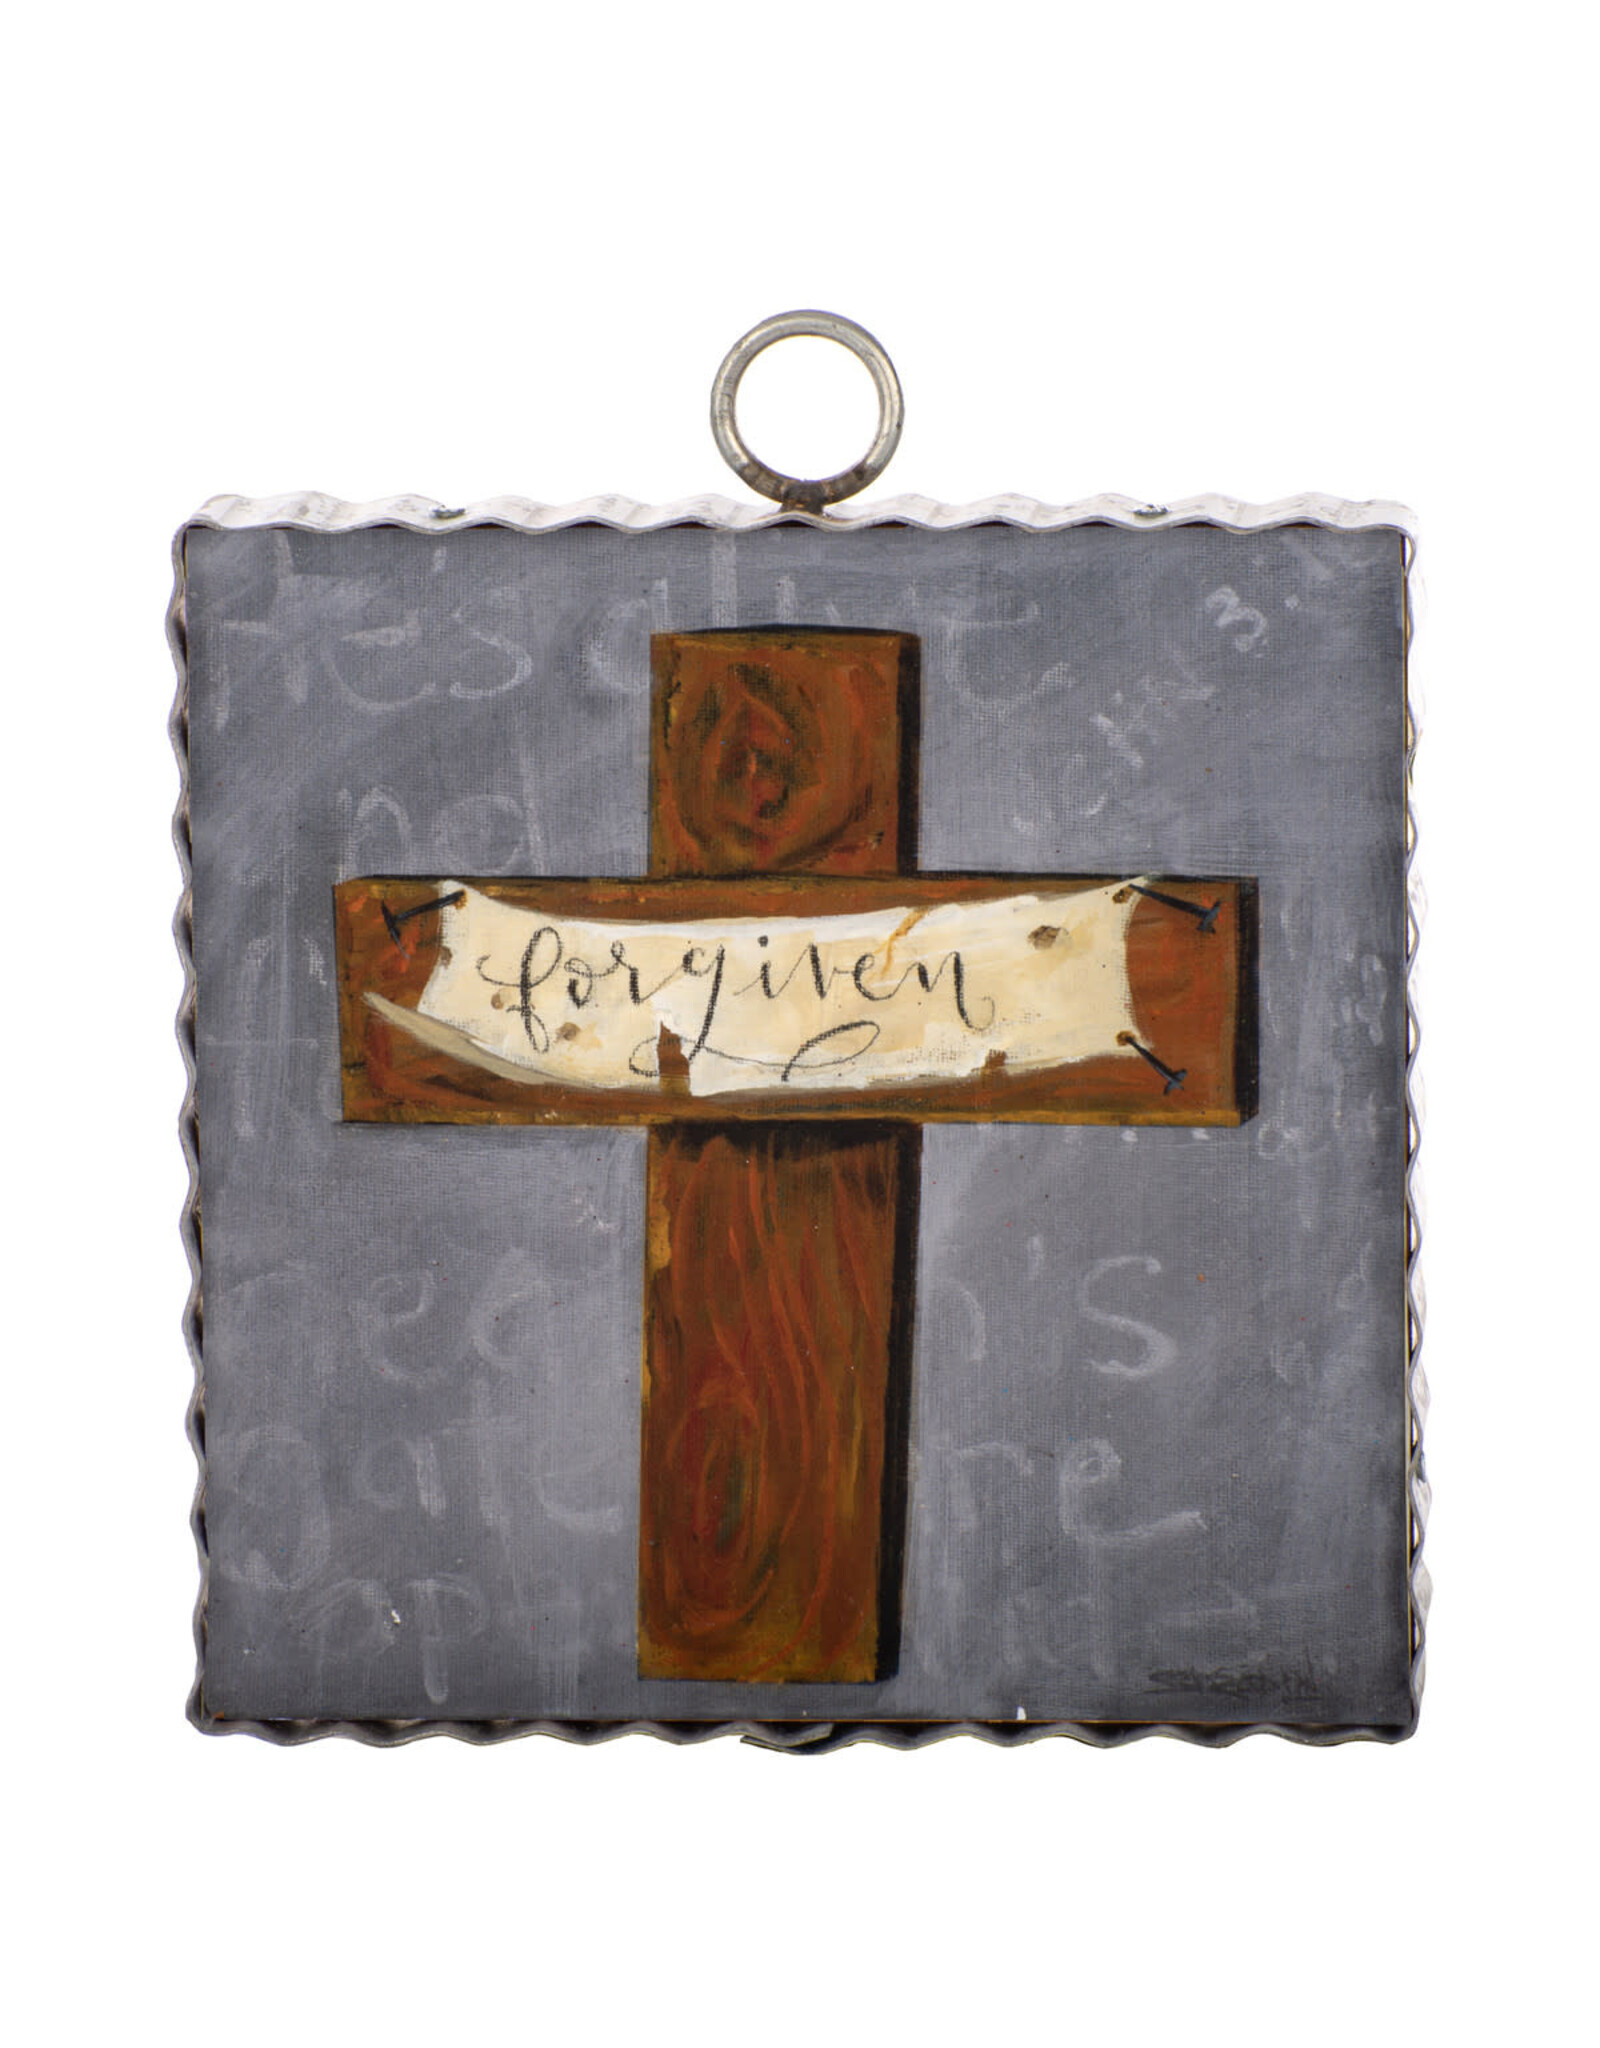 RTC Gallery Forgiven Cross